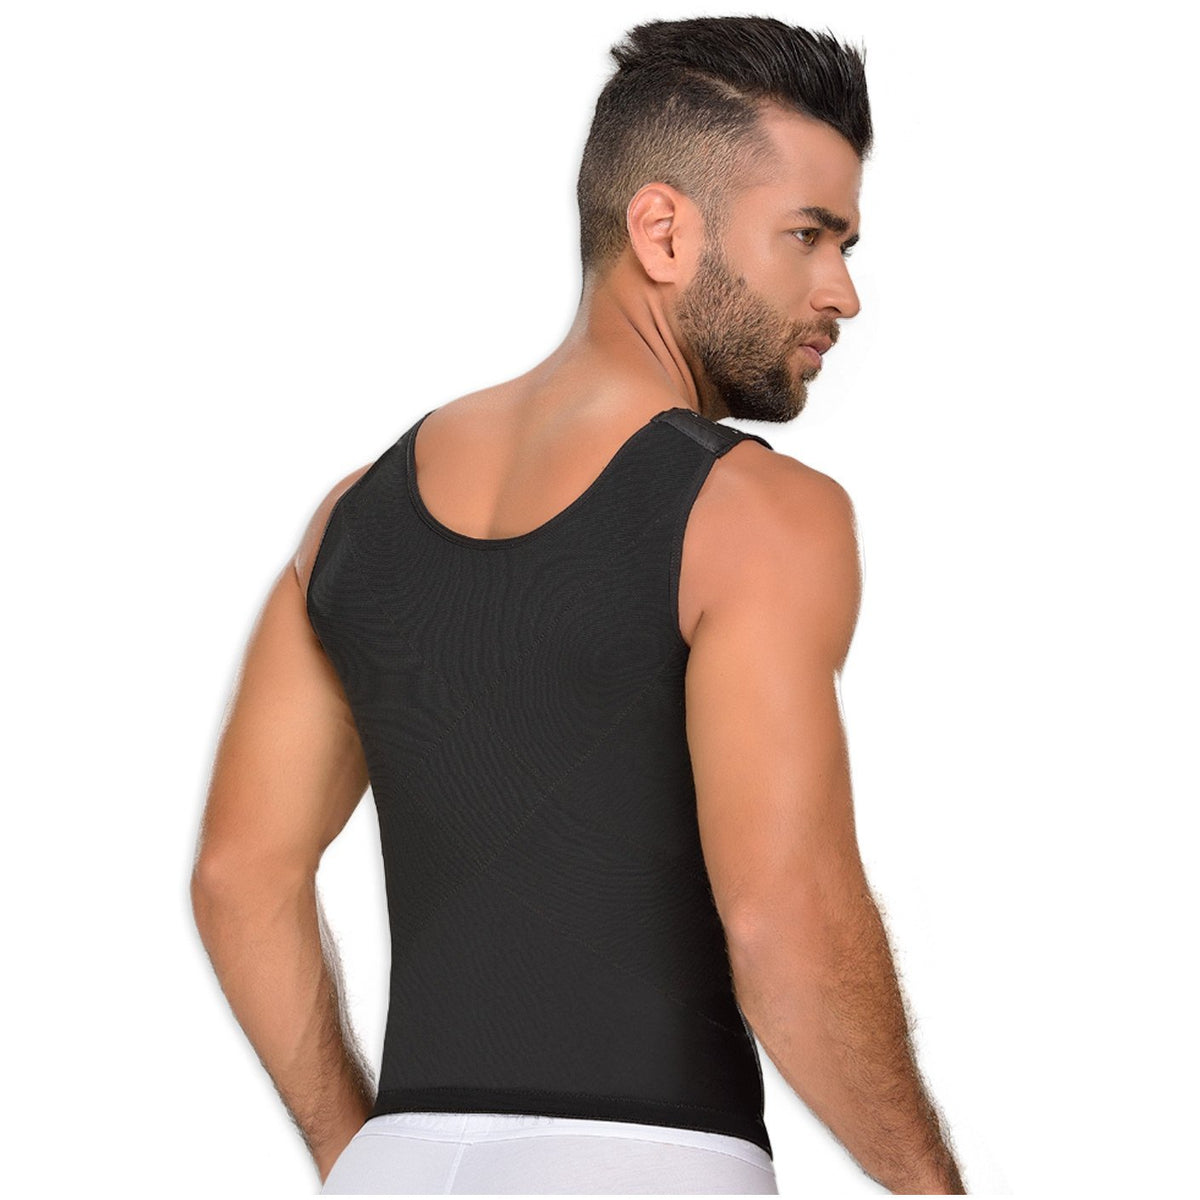 Mens Waist Cross Chest Mens Vest Body Shaper Slim Posture Corrector For  Abdomen And Belly Reduction From Paomiao, $17.78